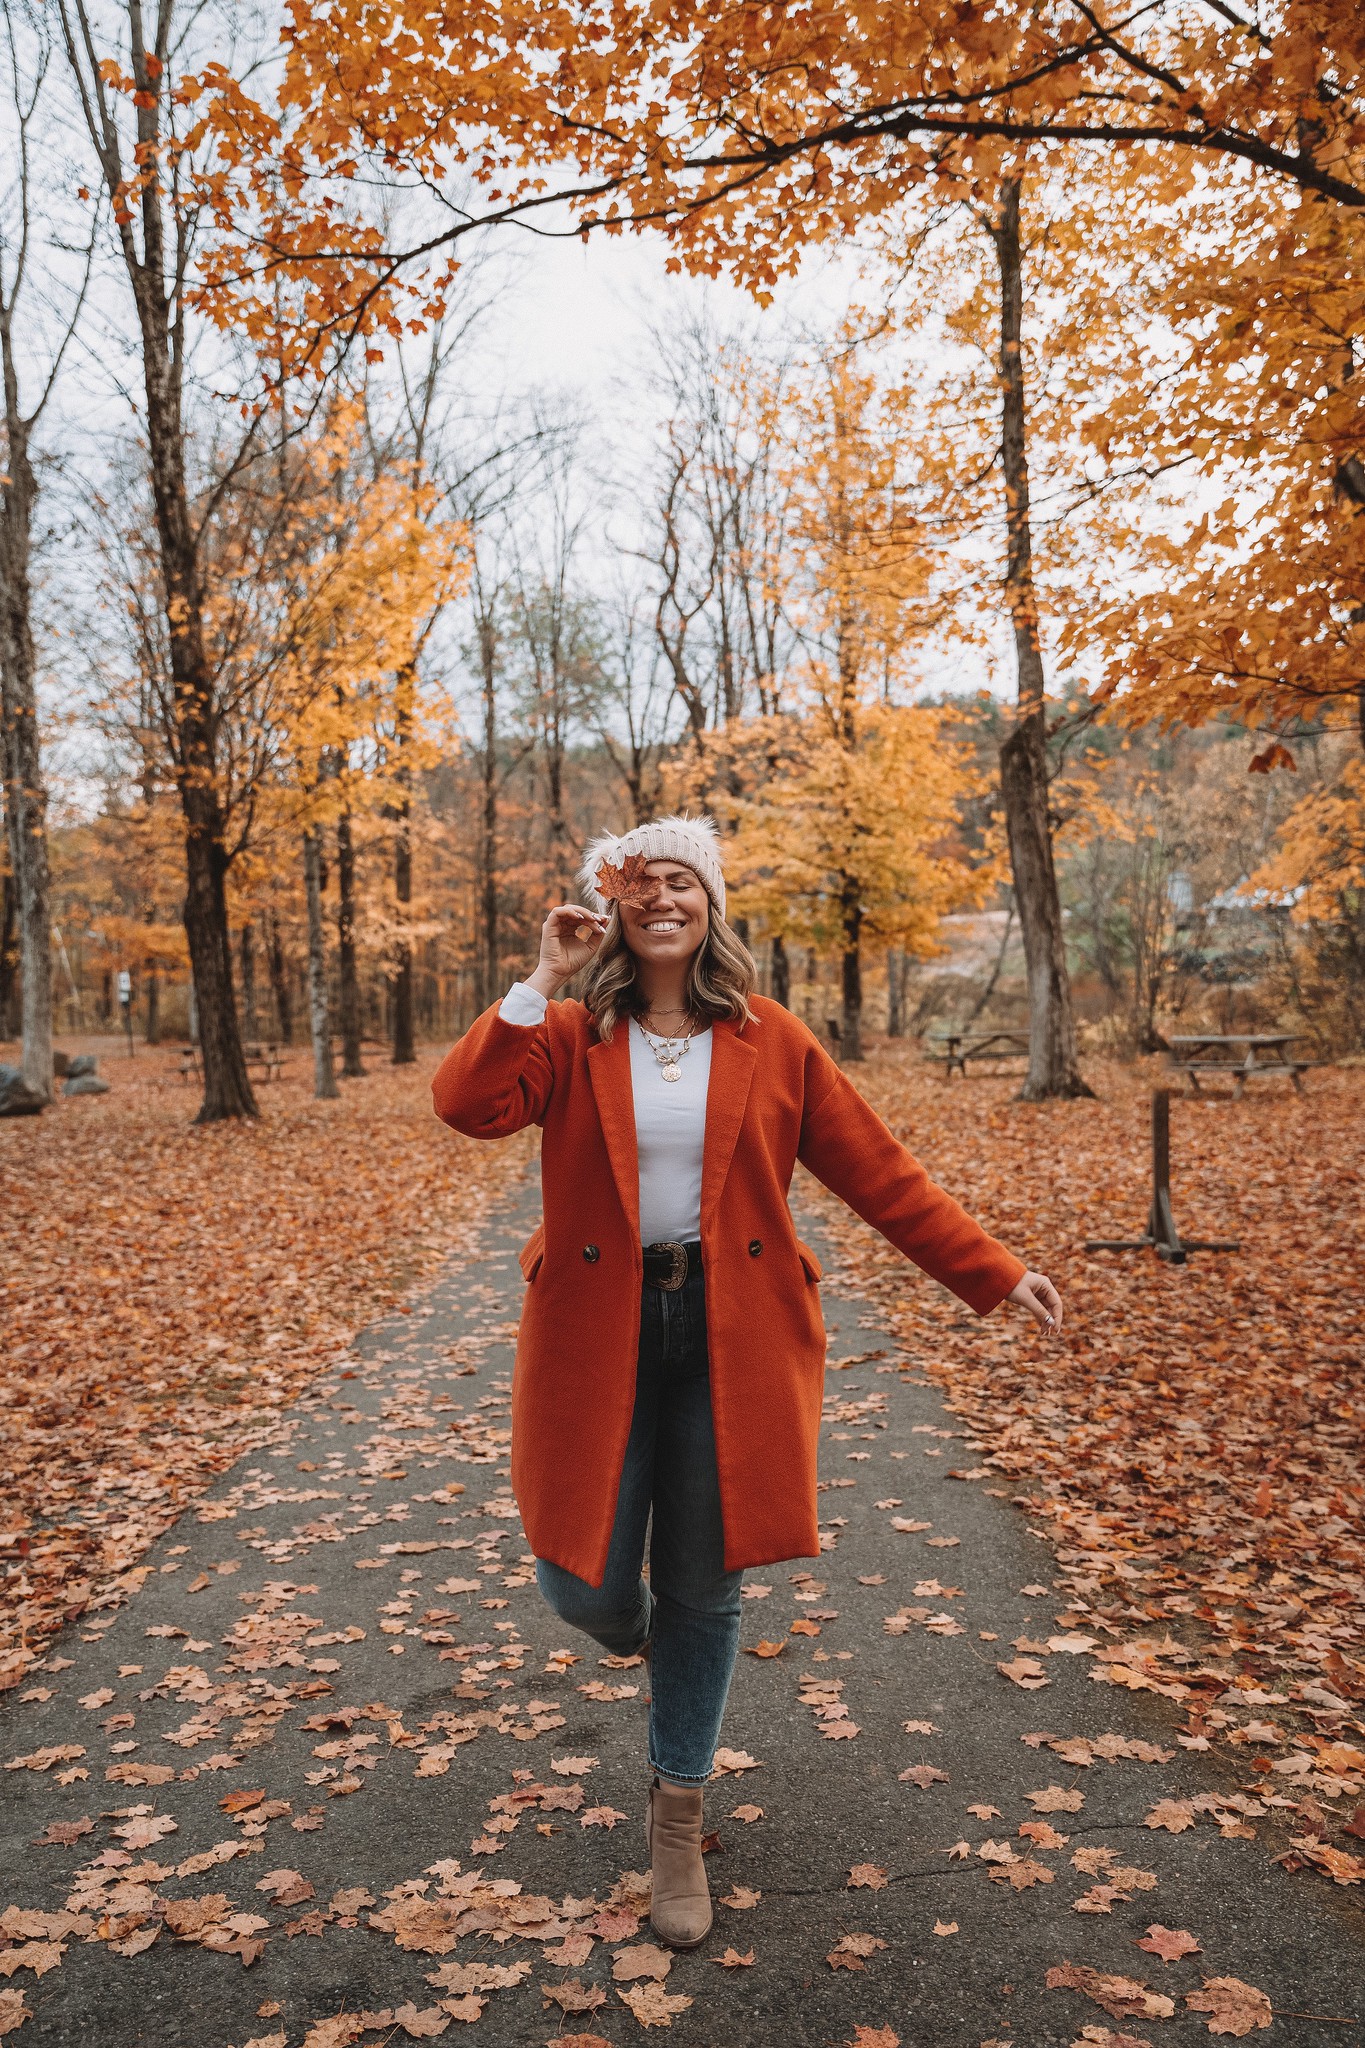 Fall Leaf Photo Prop | How to Pose with Fall Leaves | Fall Foliage Outfit | Orange Coat | What to Wear in Vermont in the Fall | Vermont Packing List for Fall | What to Wear in Vermont in October | What to Wear on a Fall Vacation | Fall Outfits